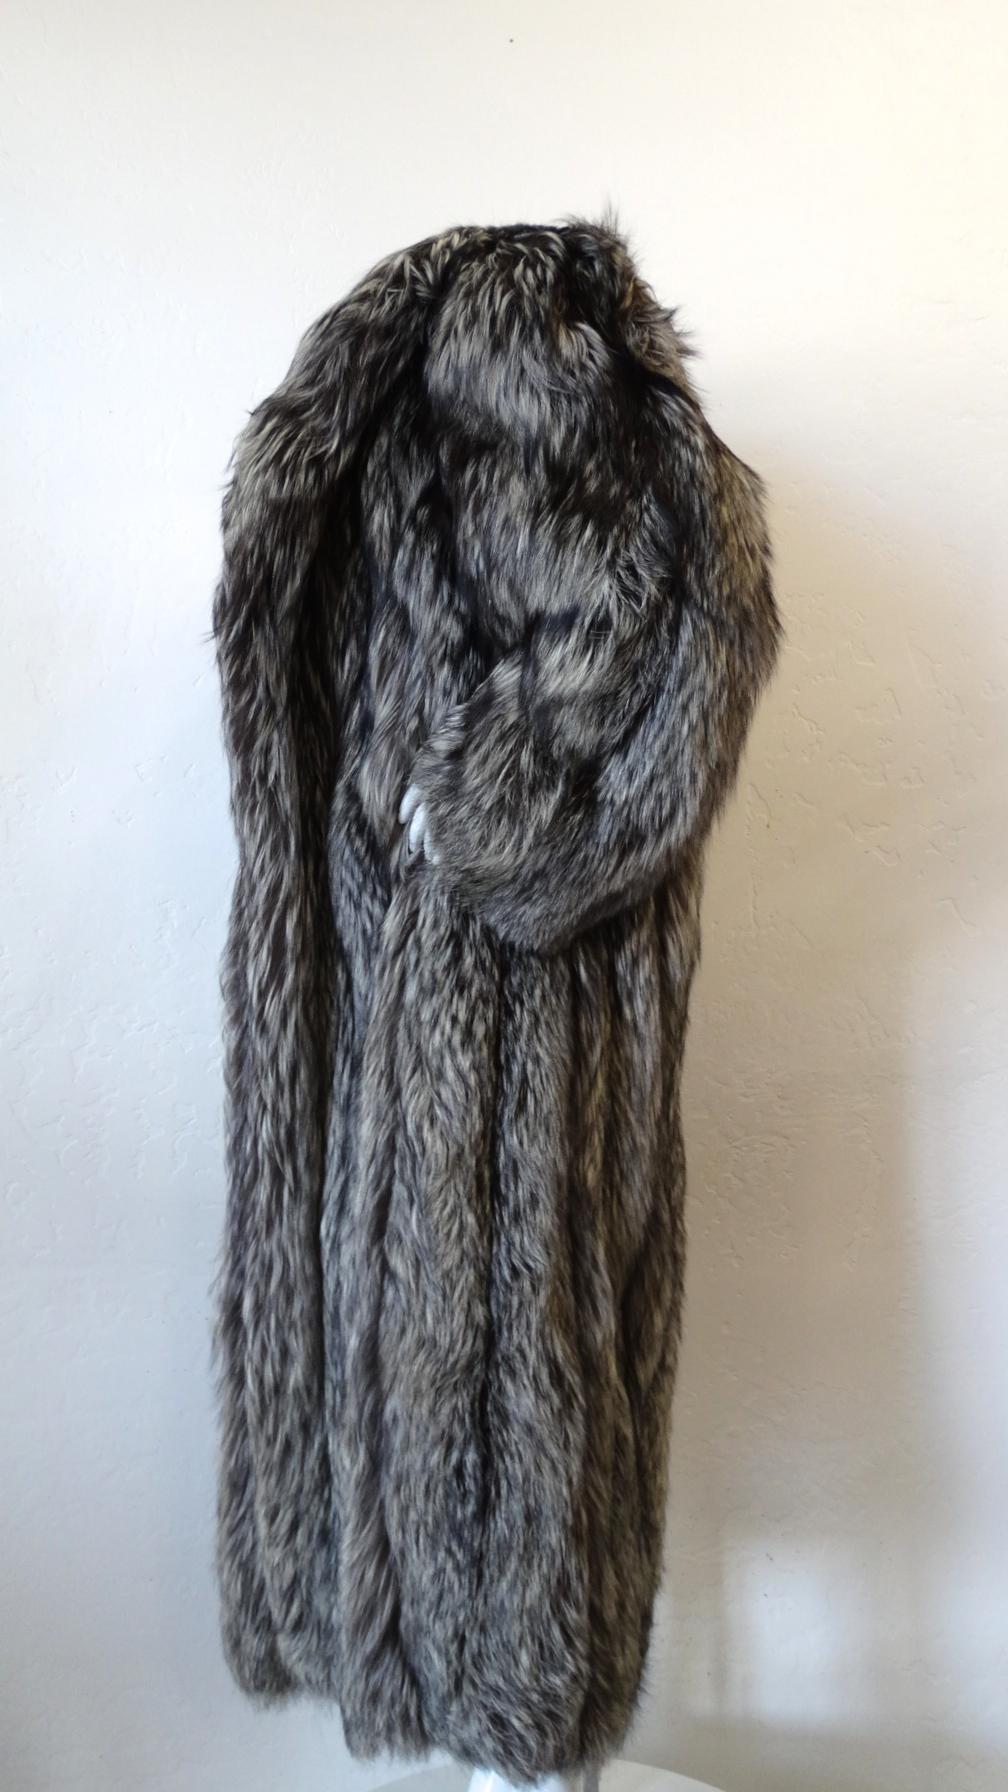 The most luxurious silver fox fur coat from designer James Galanos, circa 1980s! Super plush silver and black fox fur sewn in vertical lines up the front and back. Long length, oversized silhouette. Big, dramatic fur collar, perfect for draping off